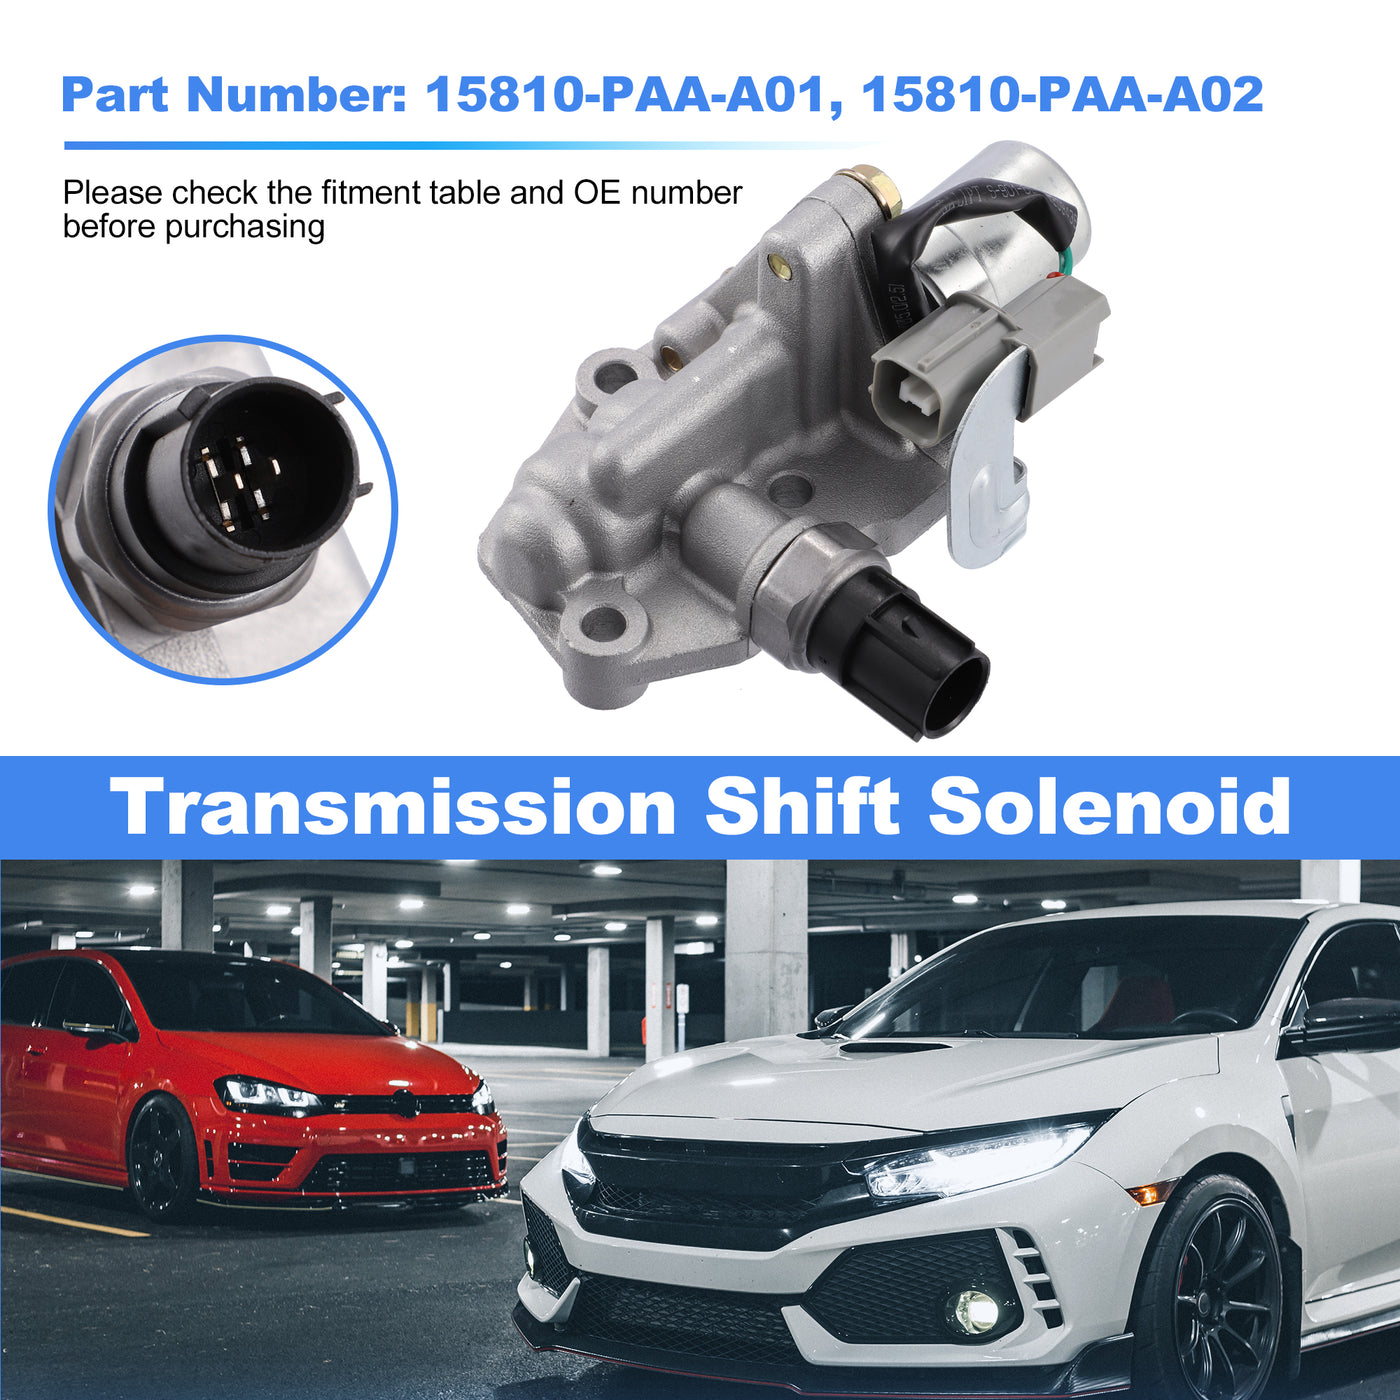 X AUTOHAUX 15810-PAA-A01 15810-PAA-A02 Transmission Shift Solenoid for Honda Accord 1998-2002 for Honda Odyssey 1998